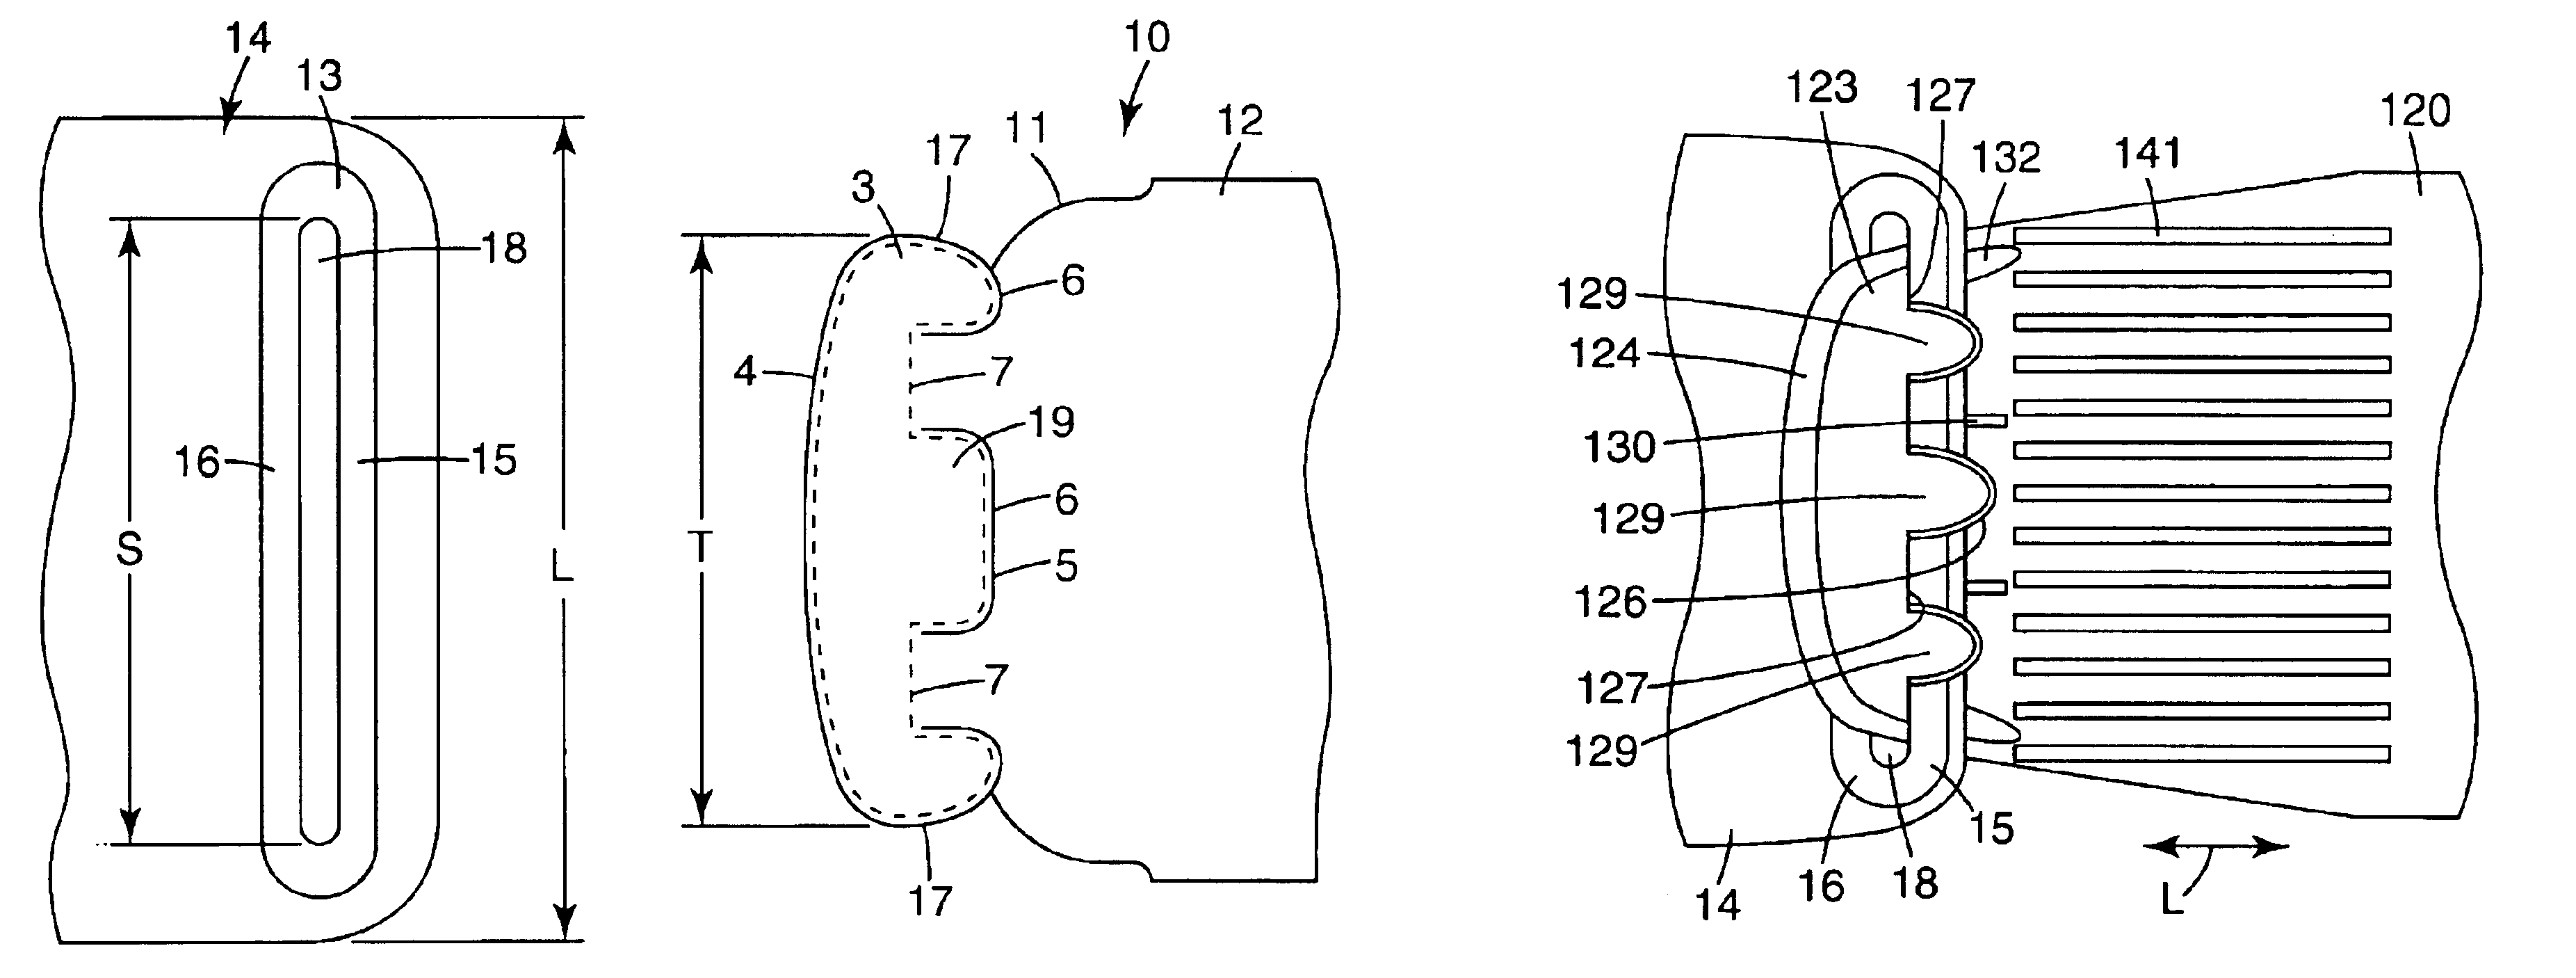 Macro closure device for disposable articles